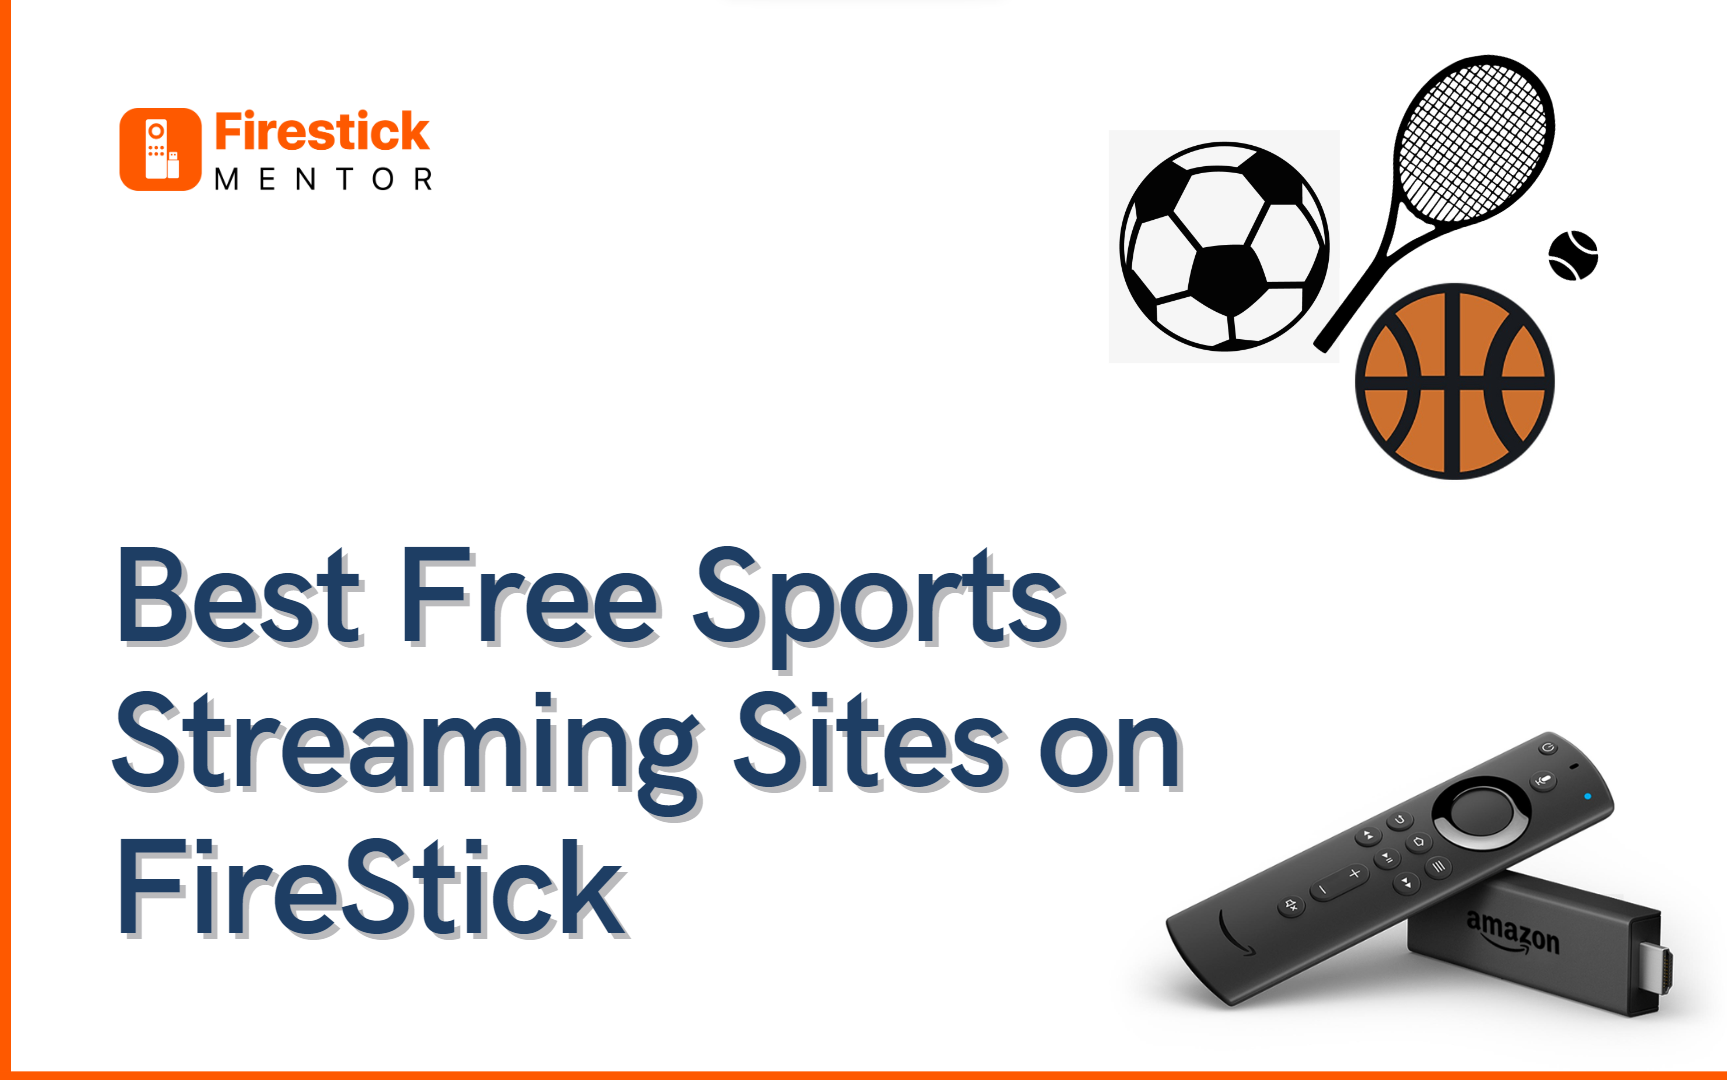 10 Best Free Sports Streaming Sites on FireStick